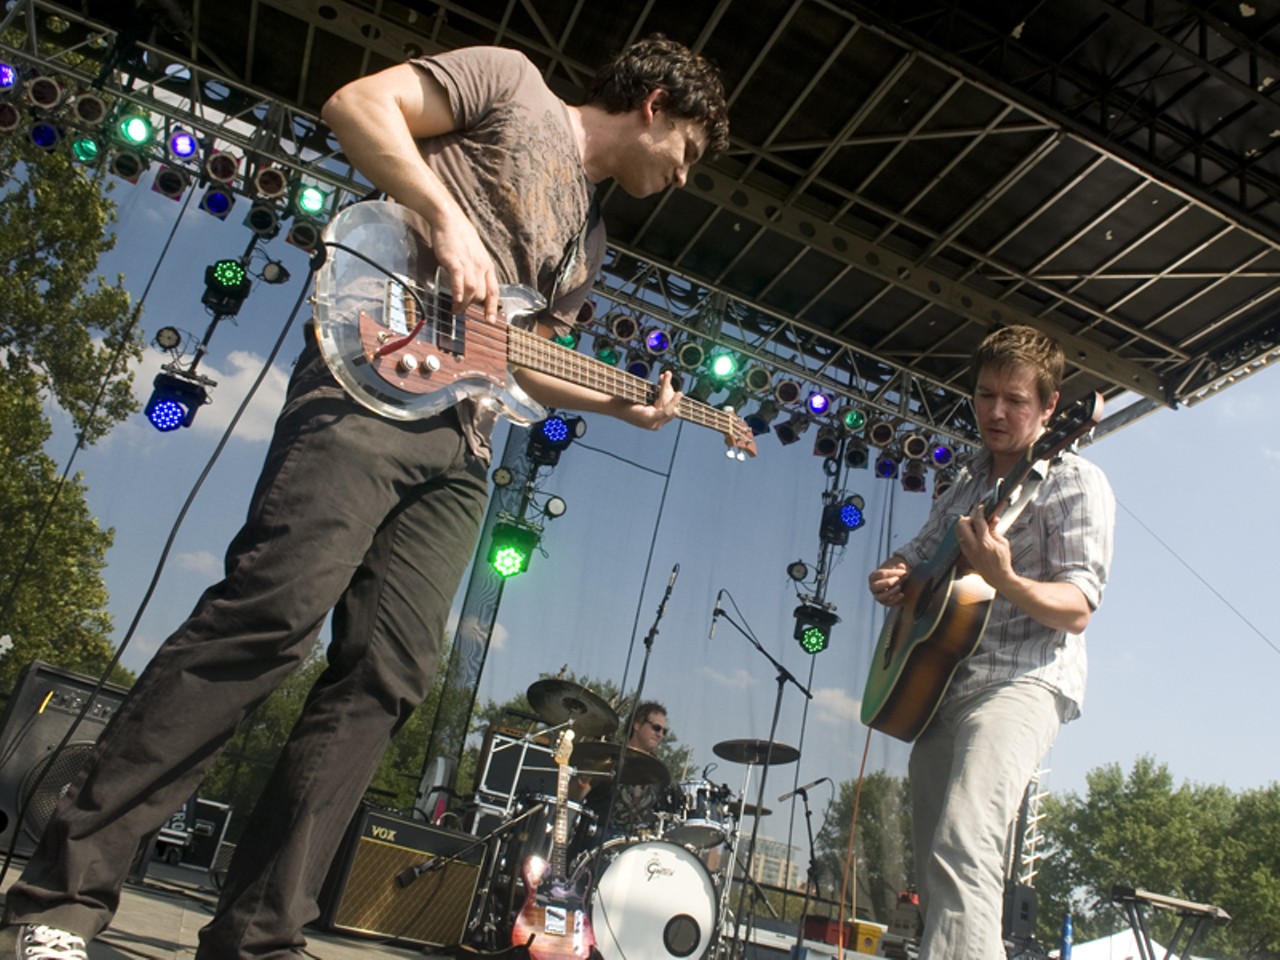 Adam Reichmann performing at the LouFest.